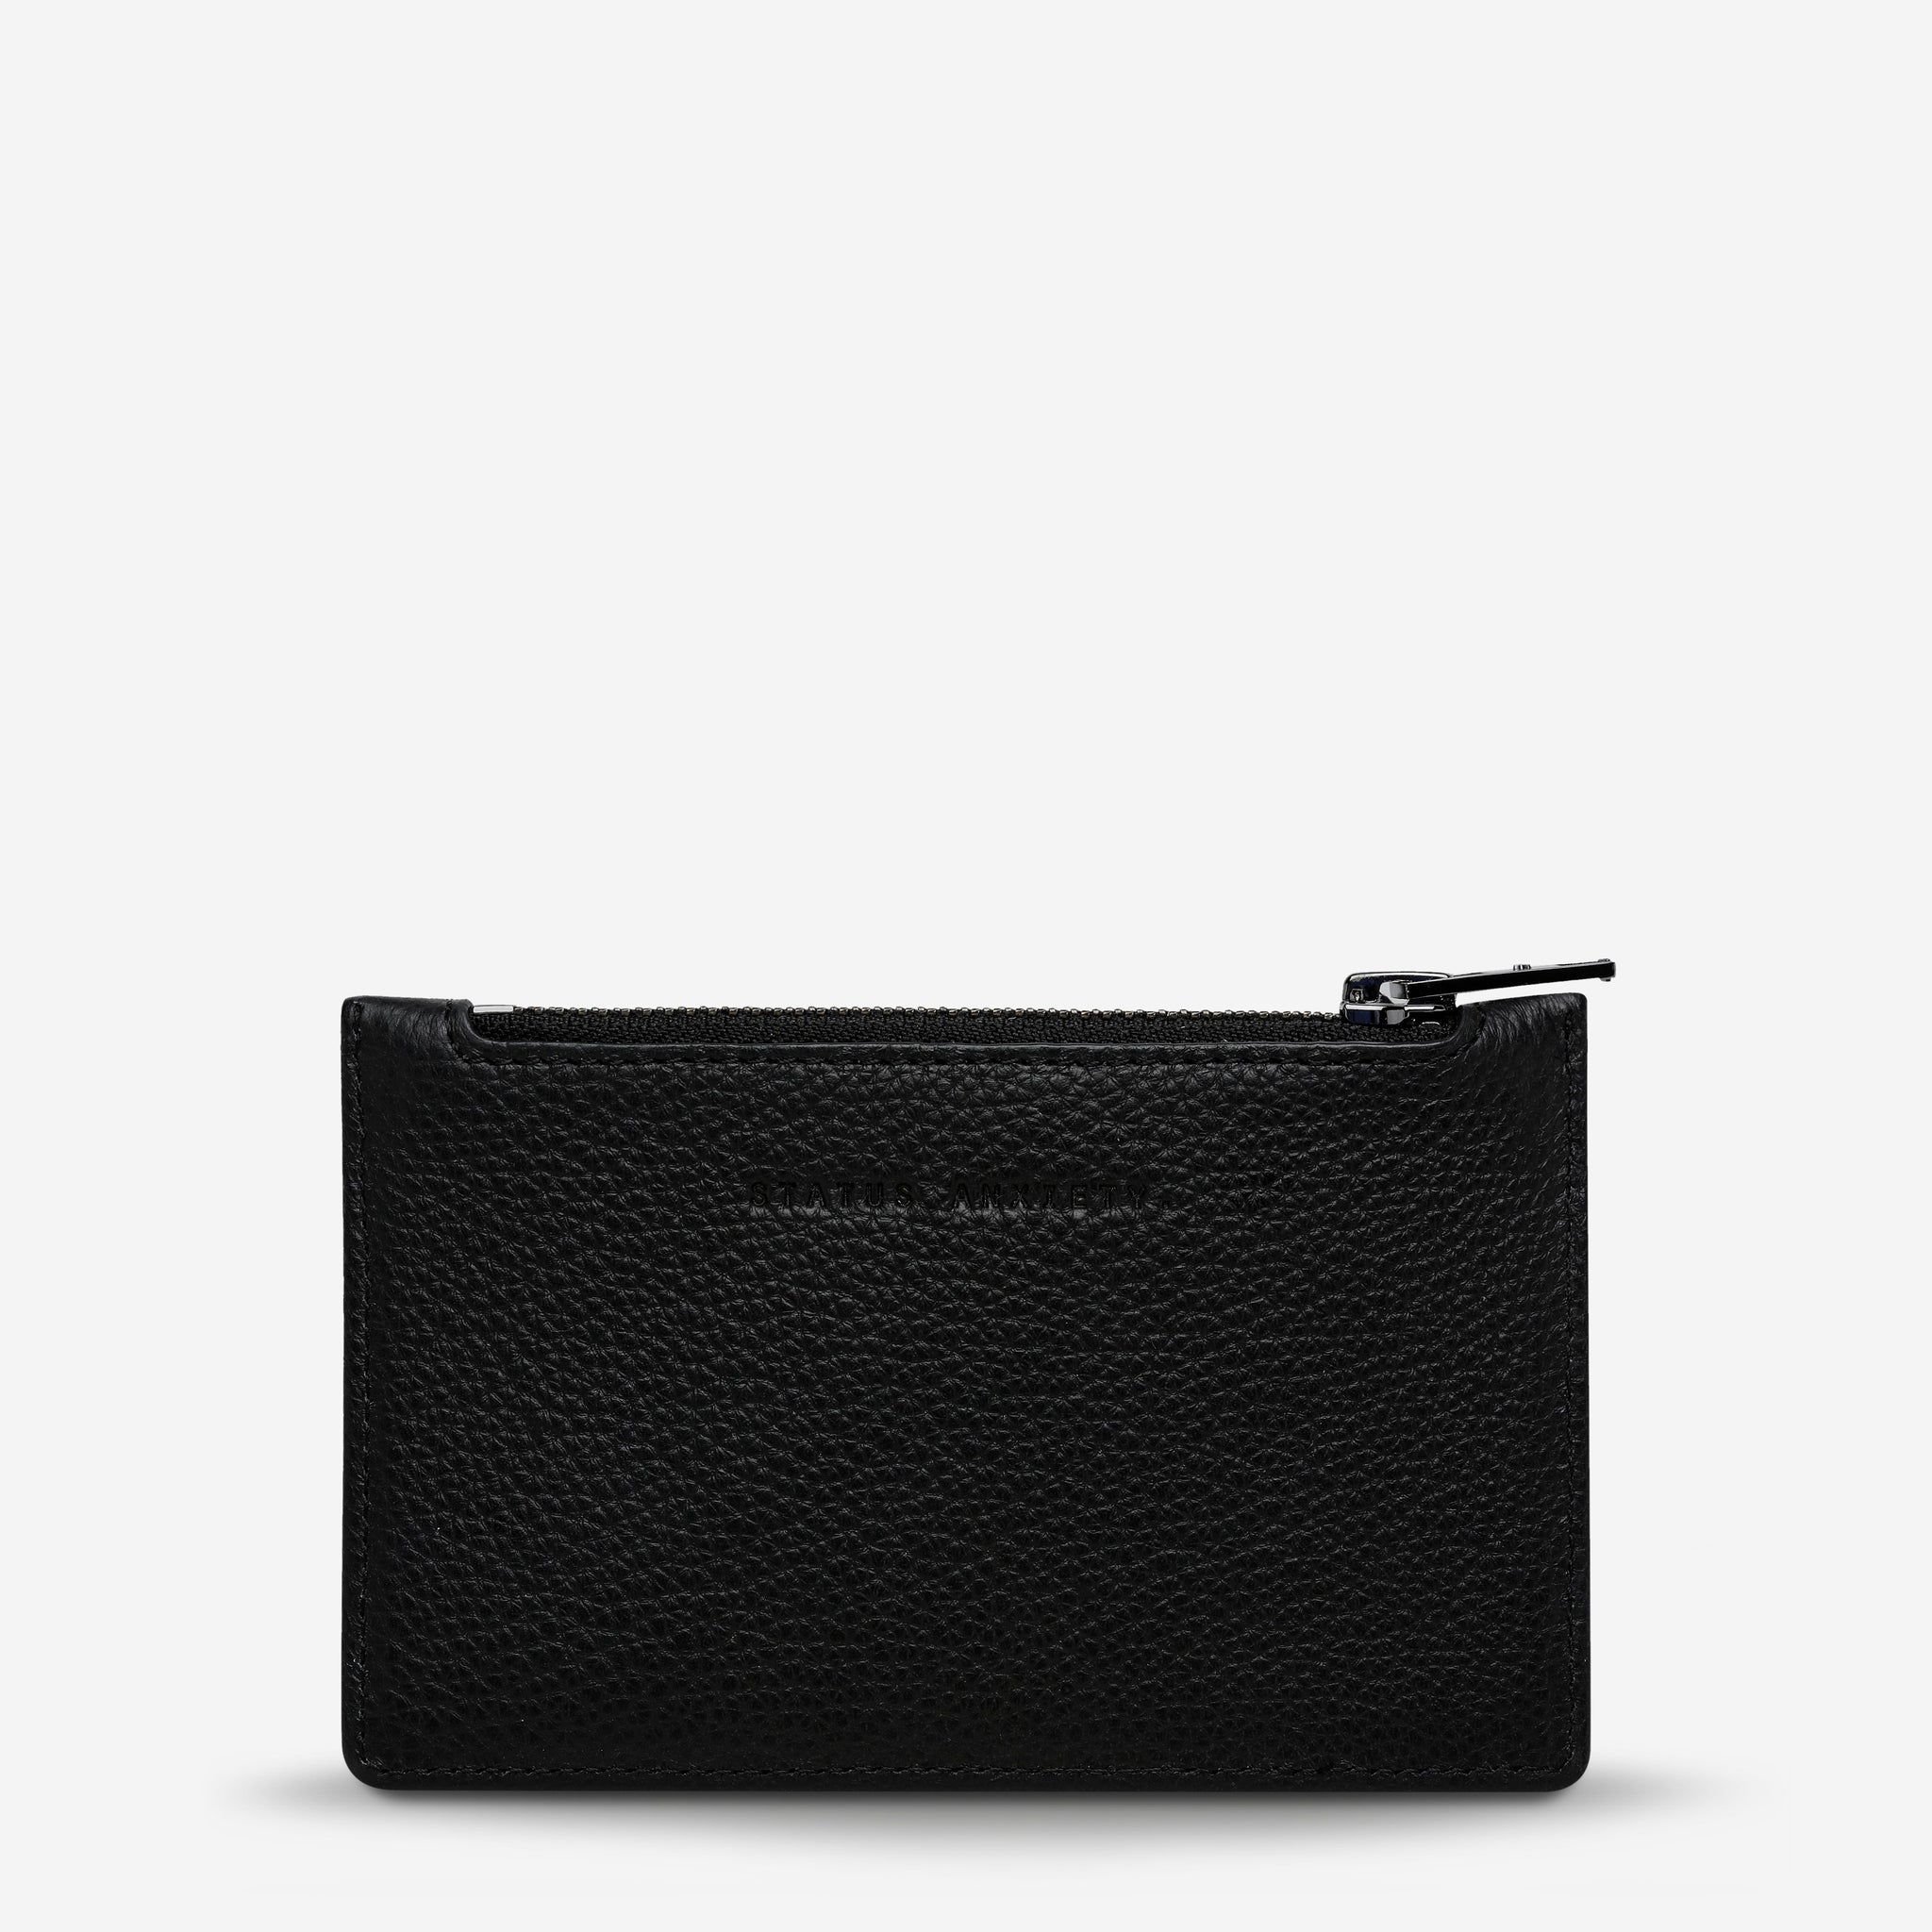 Status Anxiety Wallet - Avoiding Things - Multiple options